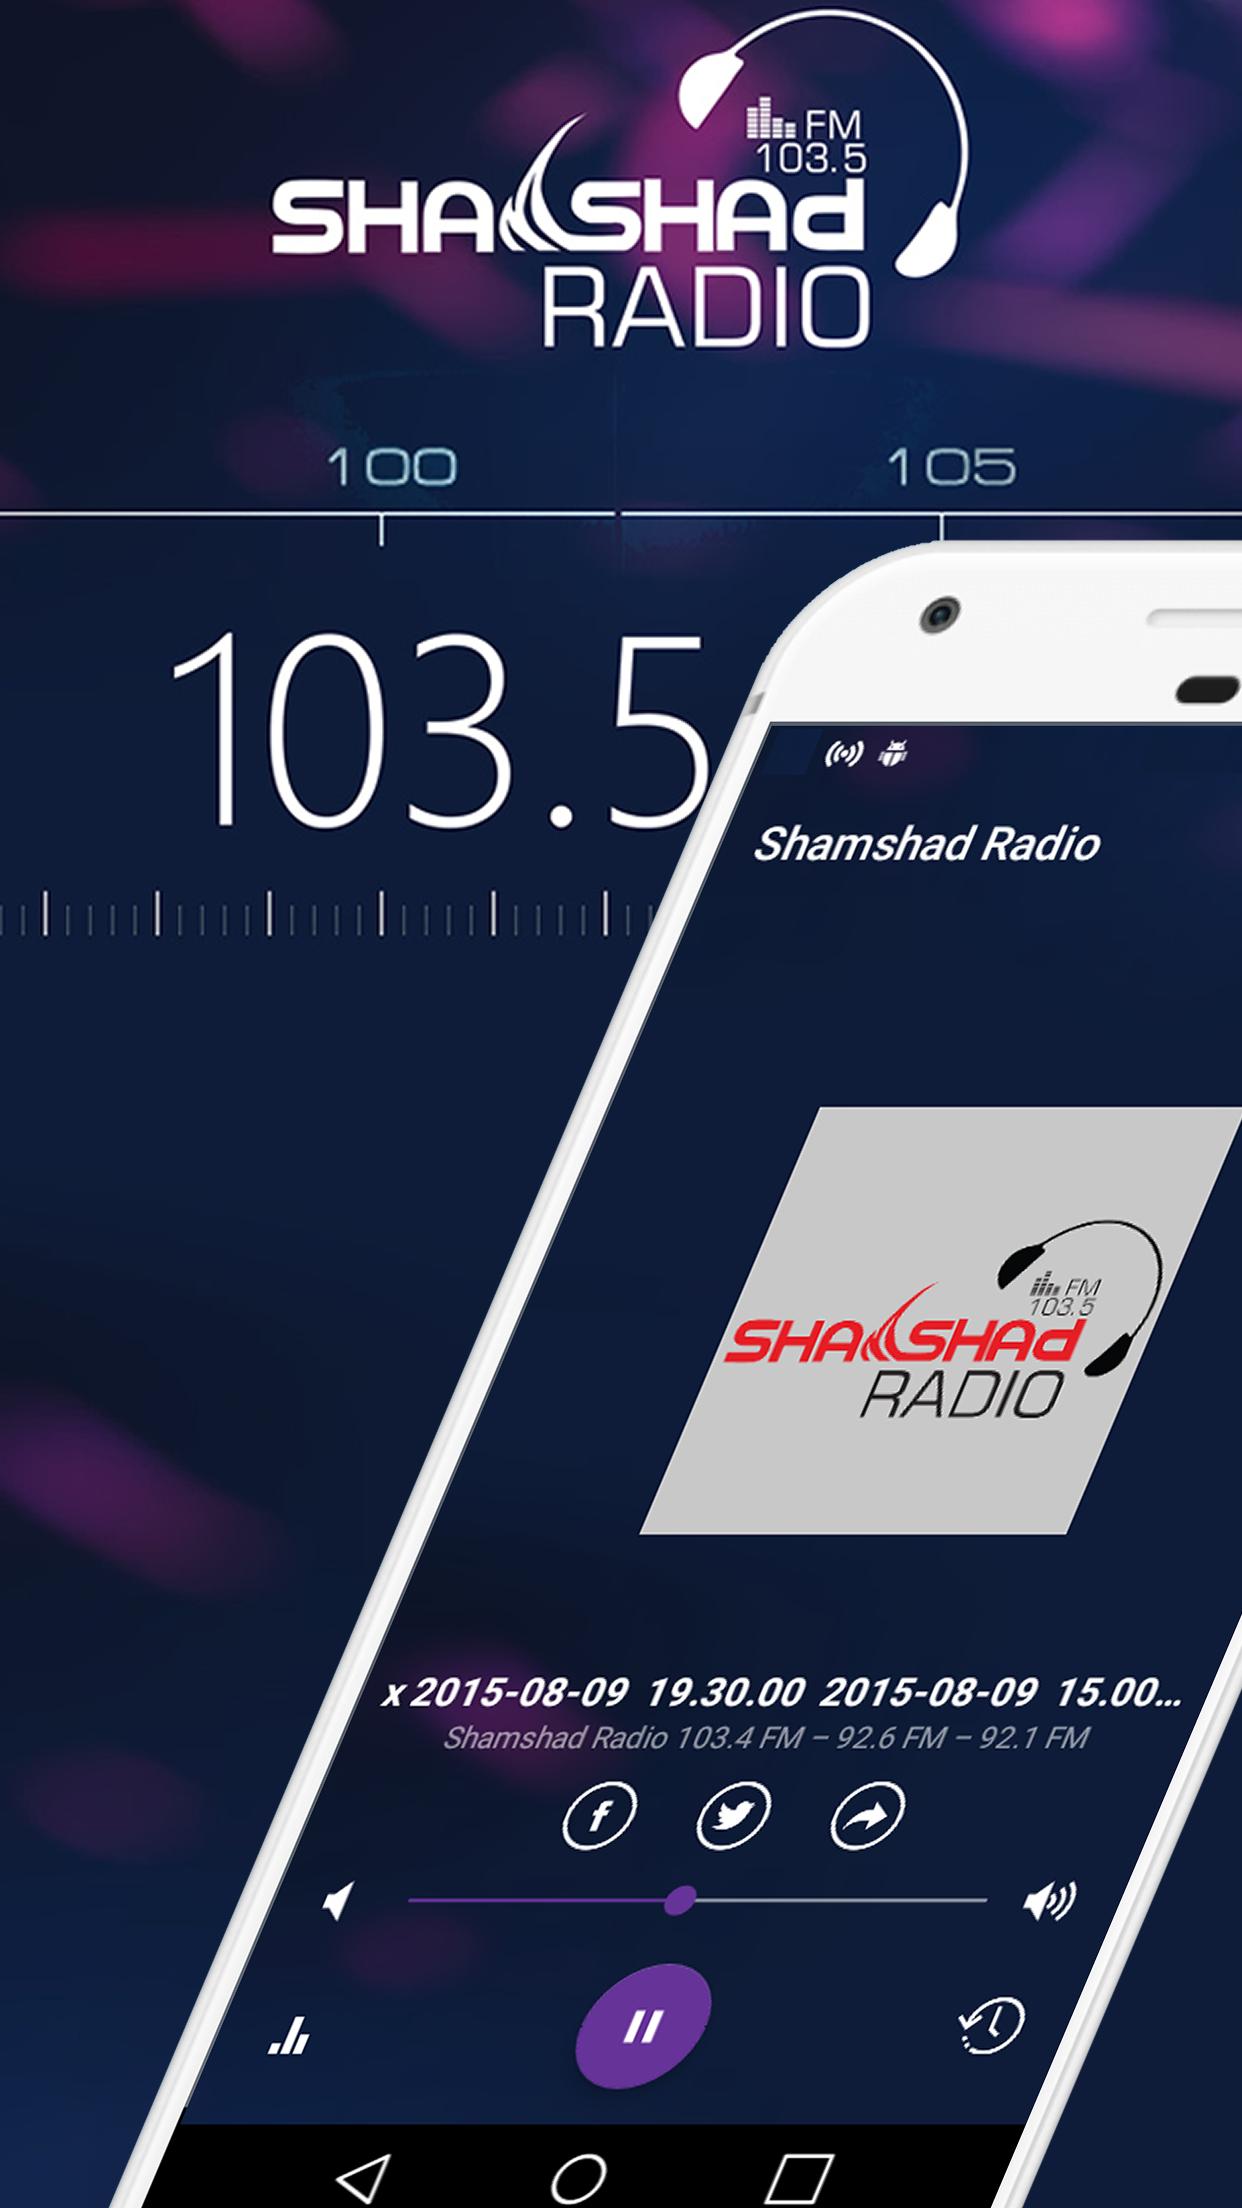 Shamshad Radio for Android - APK Download